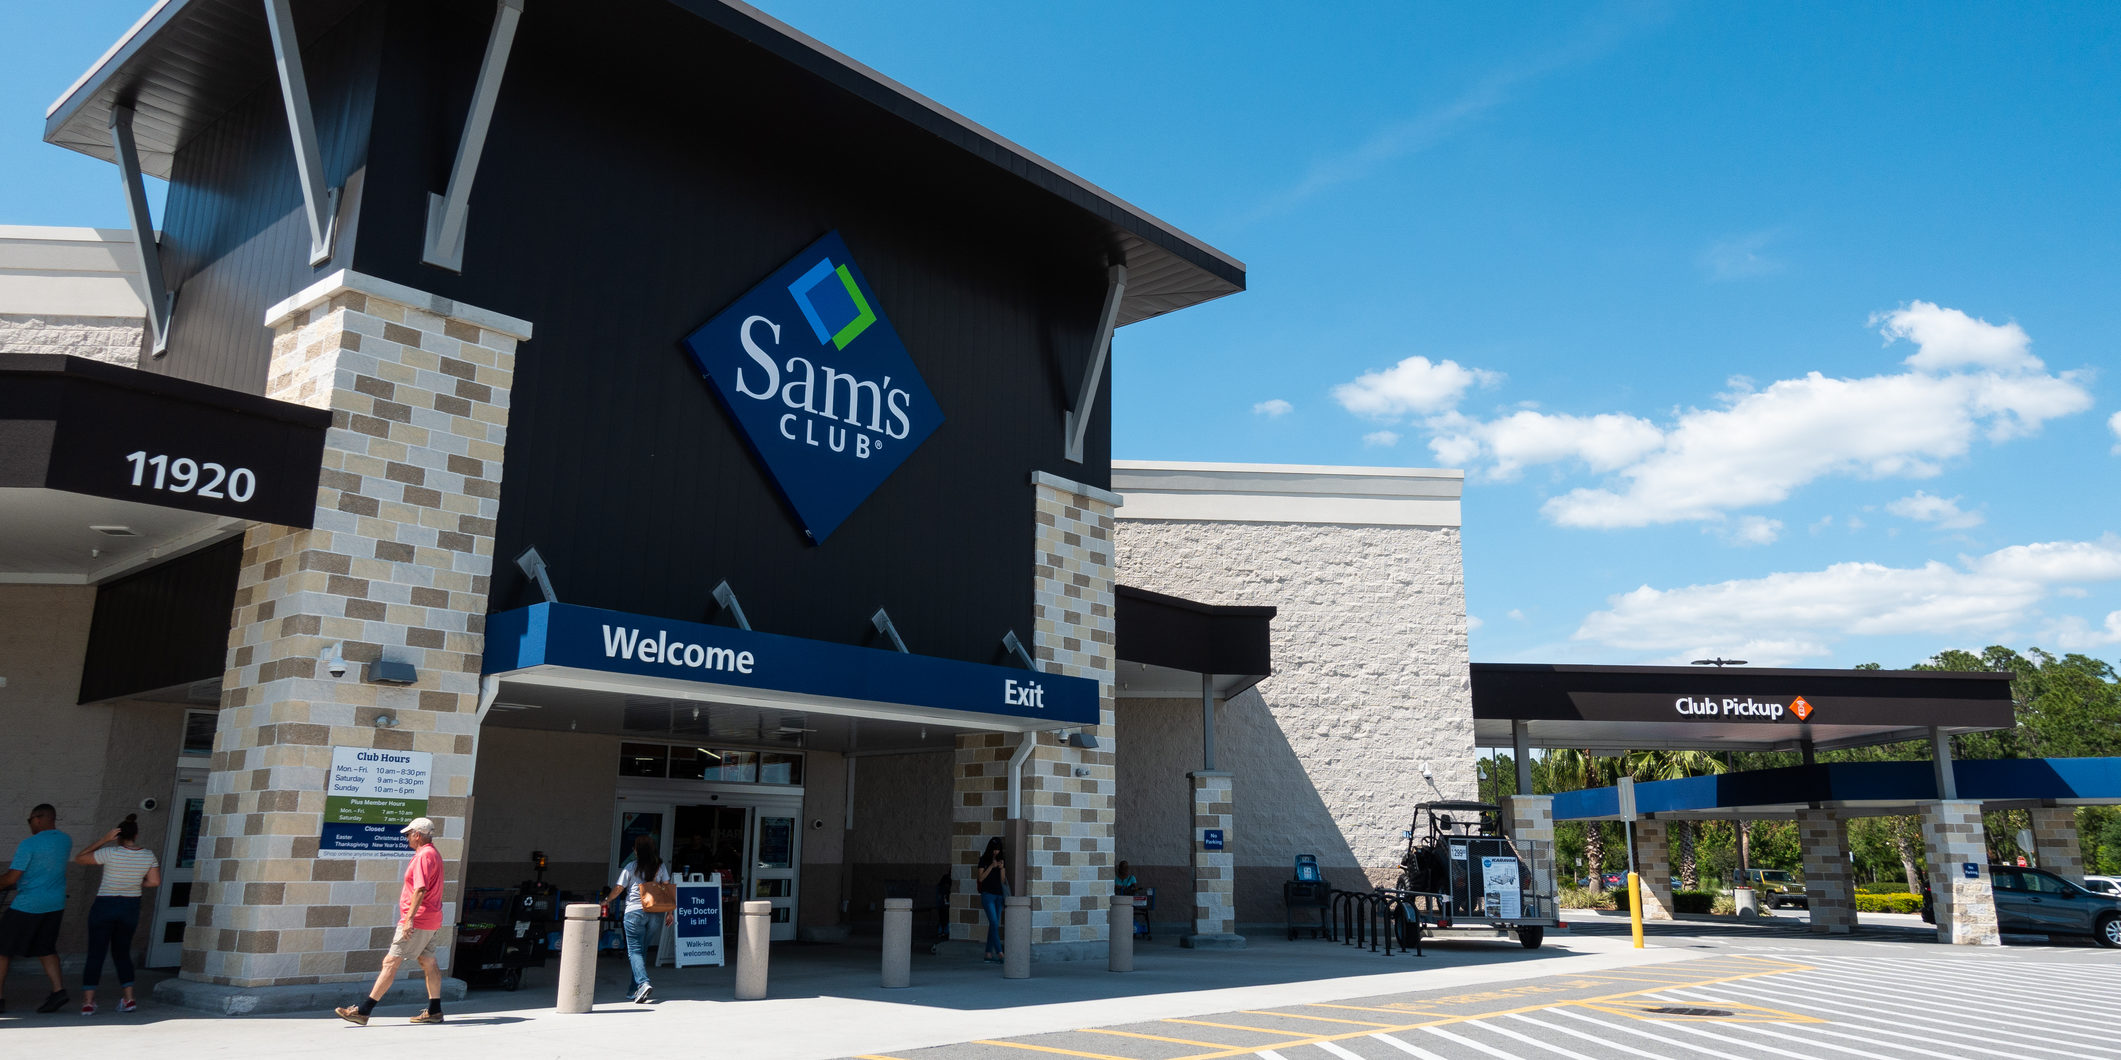 The best deals of the 40th Birthday Event at Sam's Club - Clark Deals